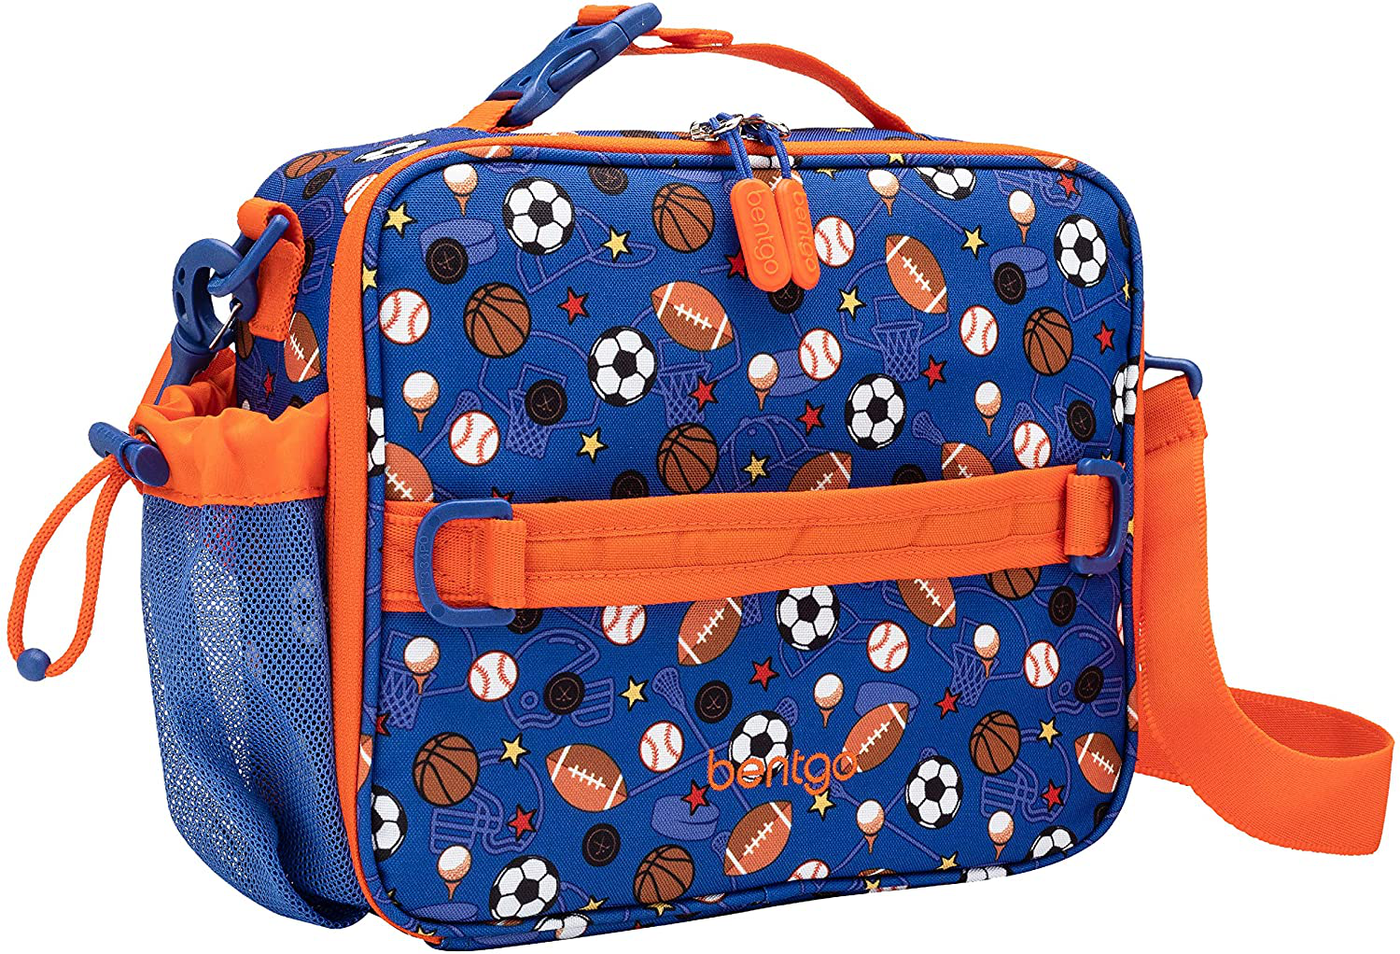 Bentgo Kids Prints Lunch Bag - Double Insulated, Durable, Water-Resistant Fabric with Interior and Exterior Zippered Pockets and External Bottle Holder- Ideal for Children of All Ages (Sports)